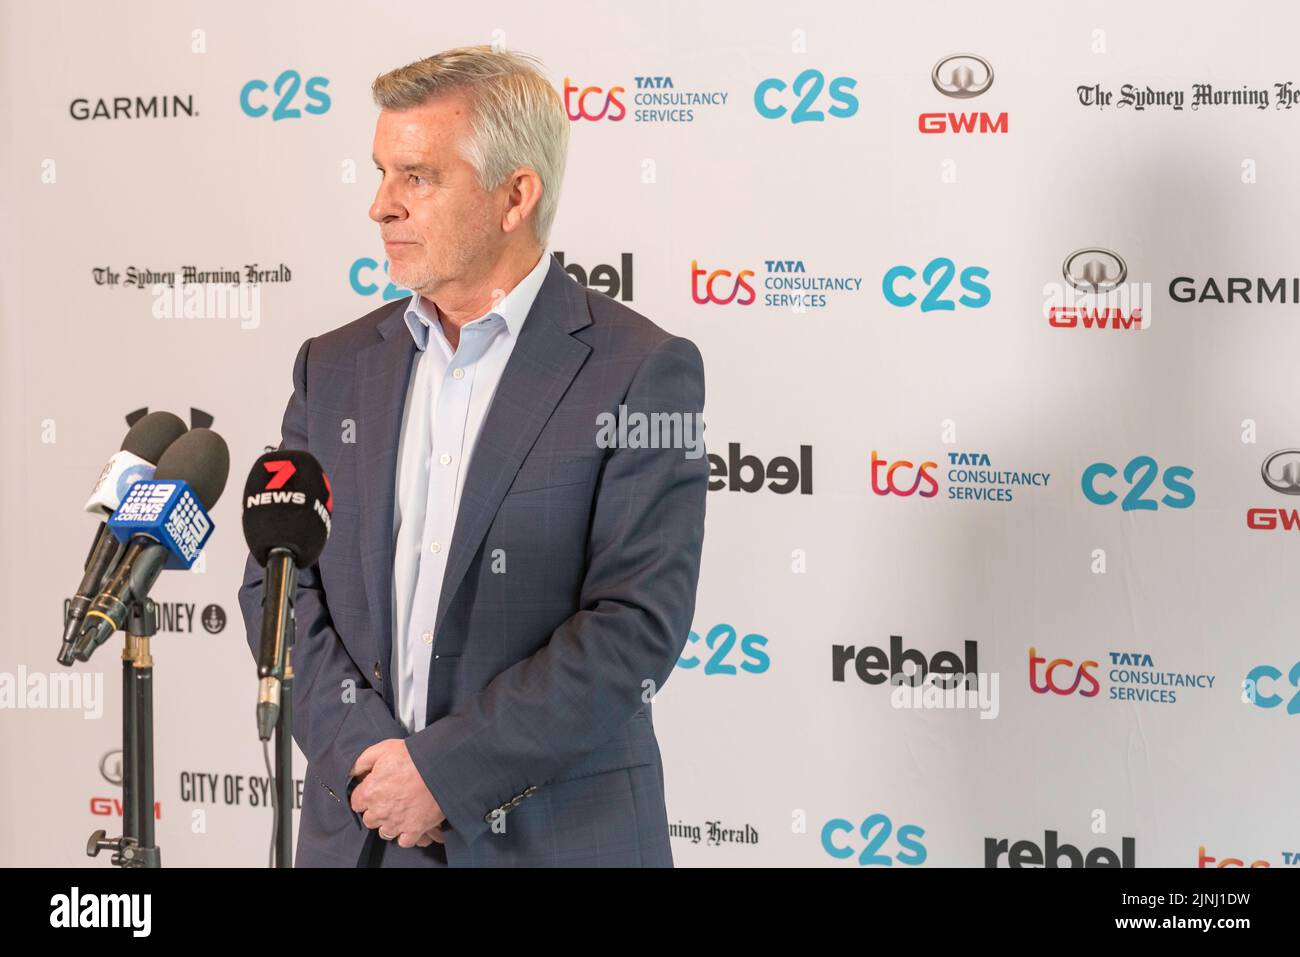 Sydney, Australia.12 August 2022: Transport For NSW Exec. Director, Customer Journey Planning, Craig Moran, at a press conference prior to the 50th City2Surf race in Sydney on Sunday. This will be the first race since 2019 after cancellations in 2020 and 2021 due to Covid-19. 60,000+ people are expected cover the fourteen-kilometre race, the largest of its kind in the world. Mr Moran said that extra public transport services will be provided before and after the event to move people as soon as possible. His advice to participants was to please be patient Credit: Stephen Dwyer / Alamy Live News Stock Photo